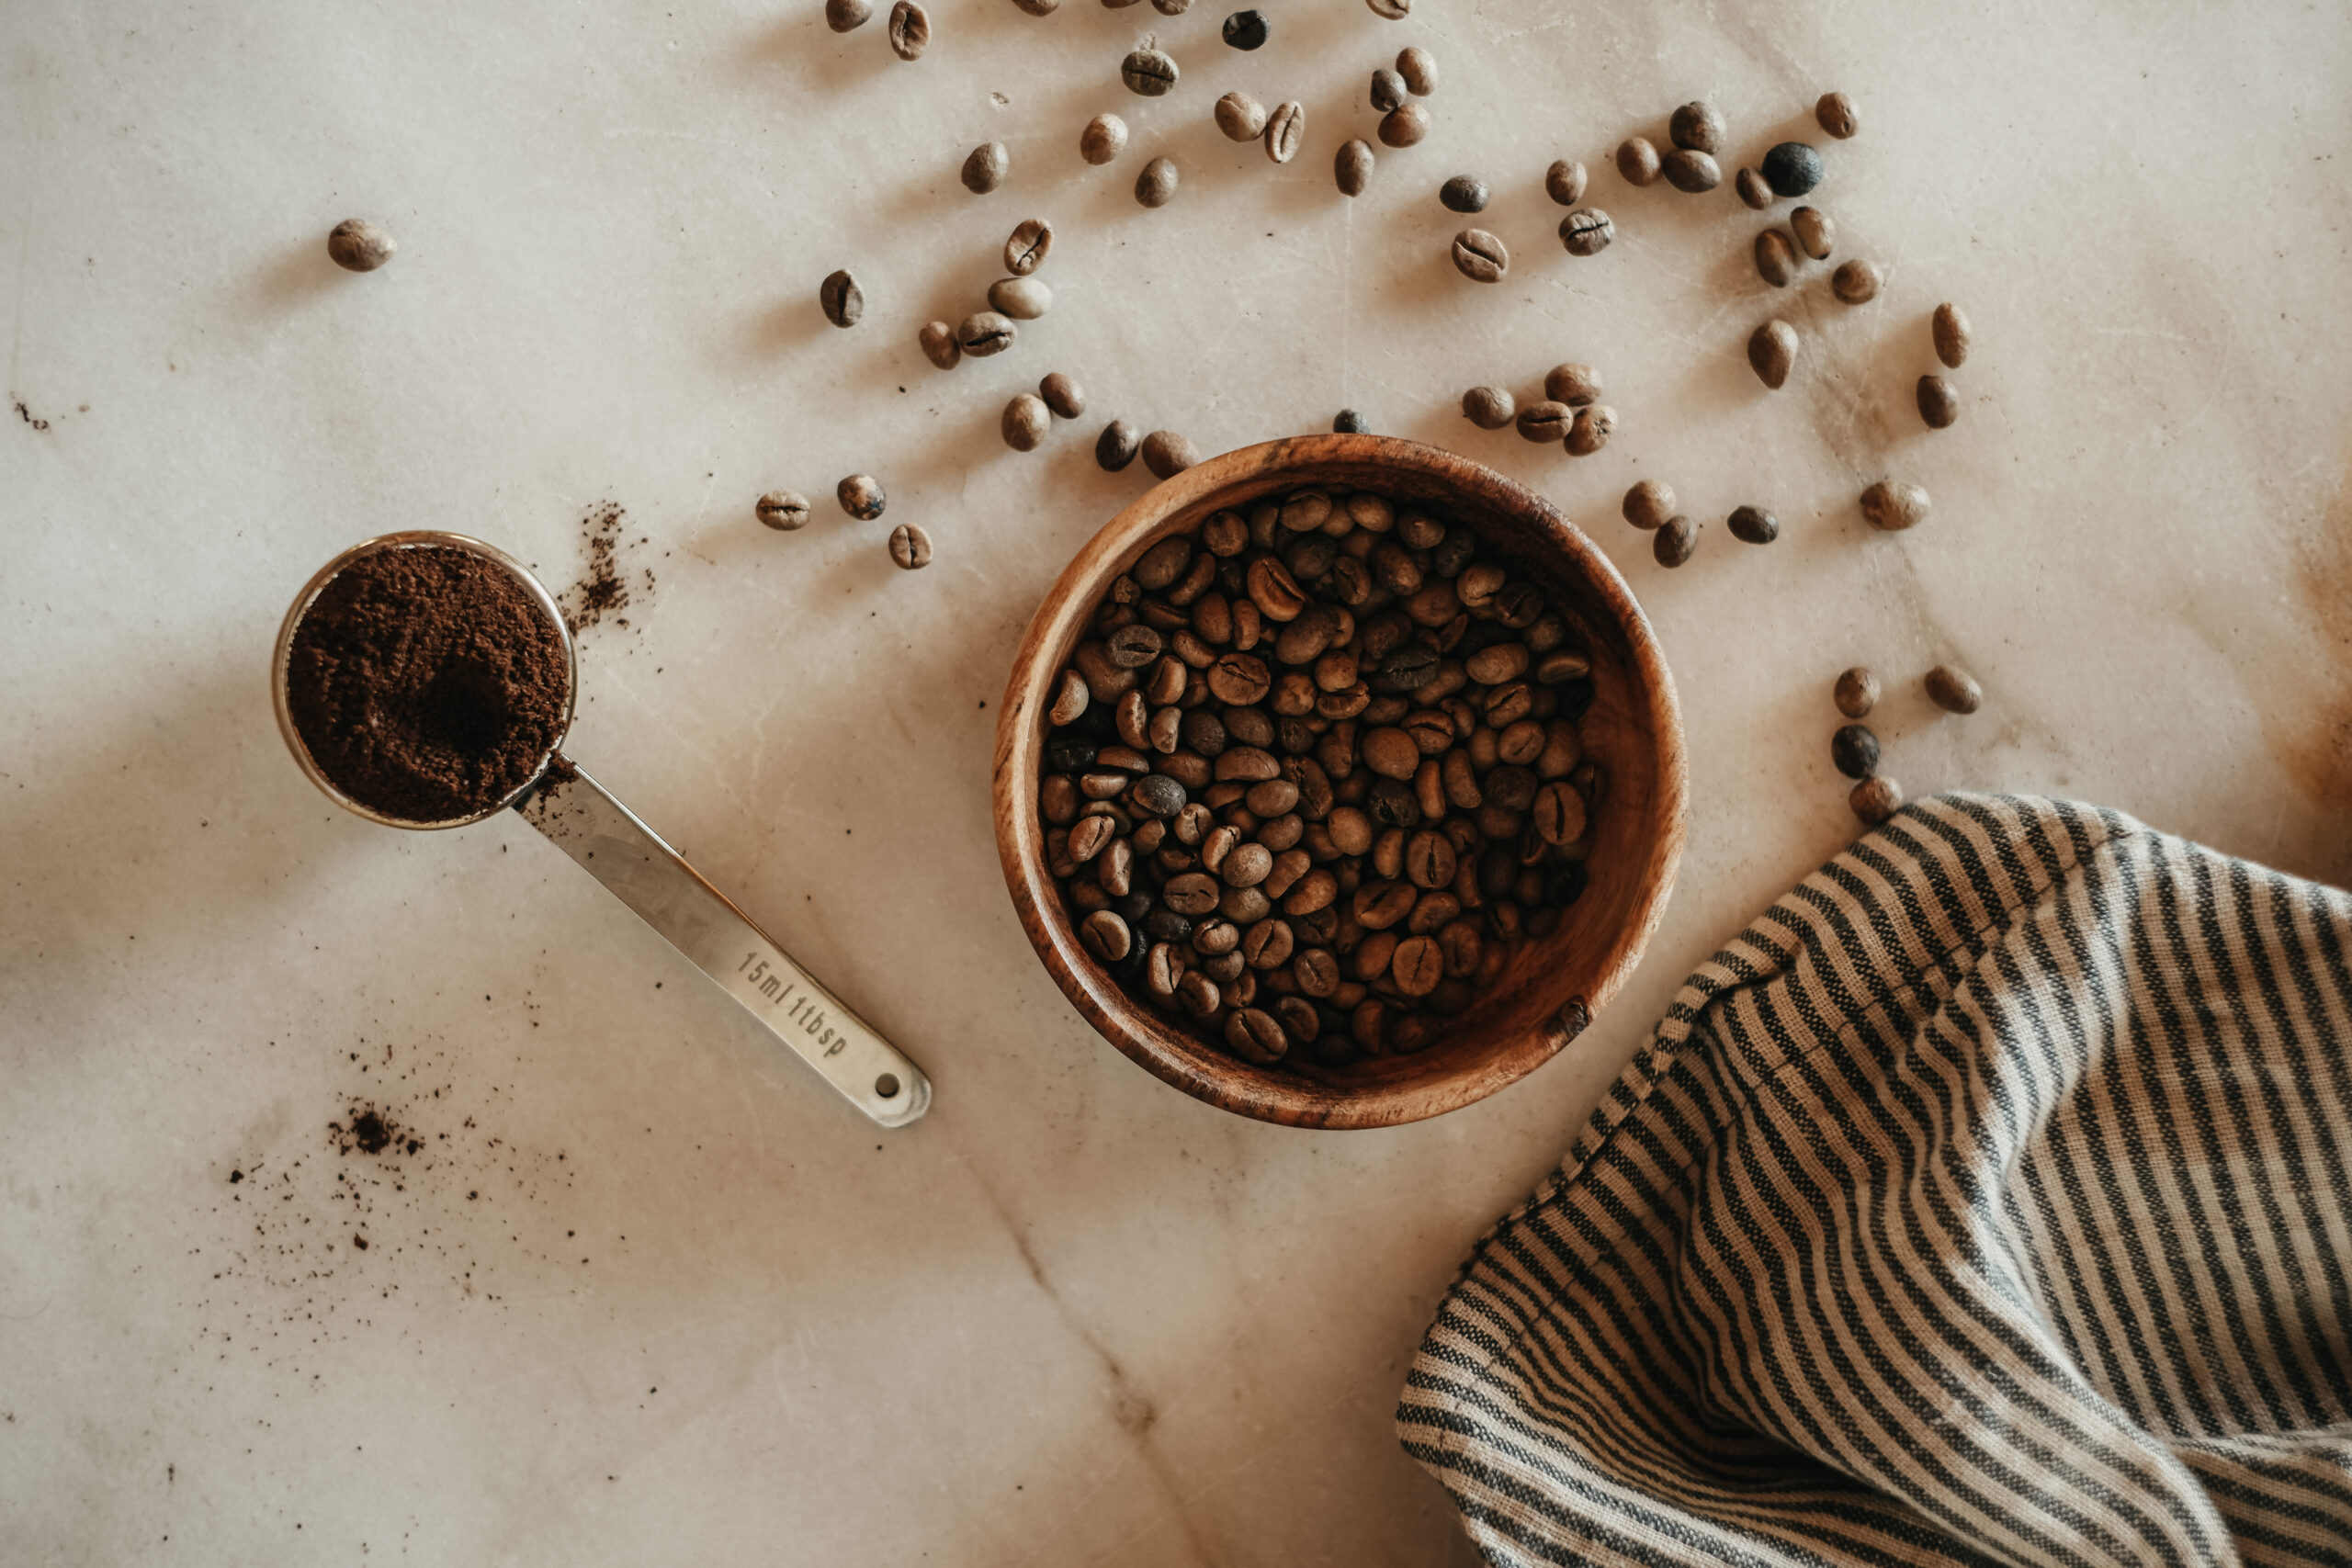 bowl of coffee beans with stainless steel measuring cup full of ground coffee and coffee beans scattered on the counter